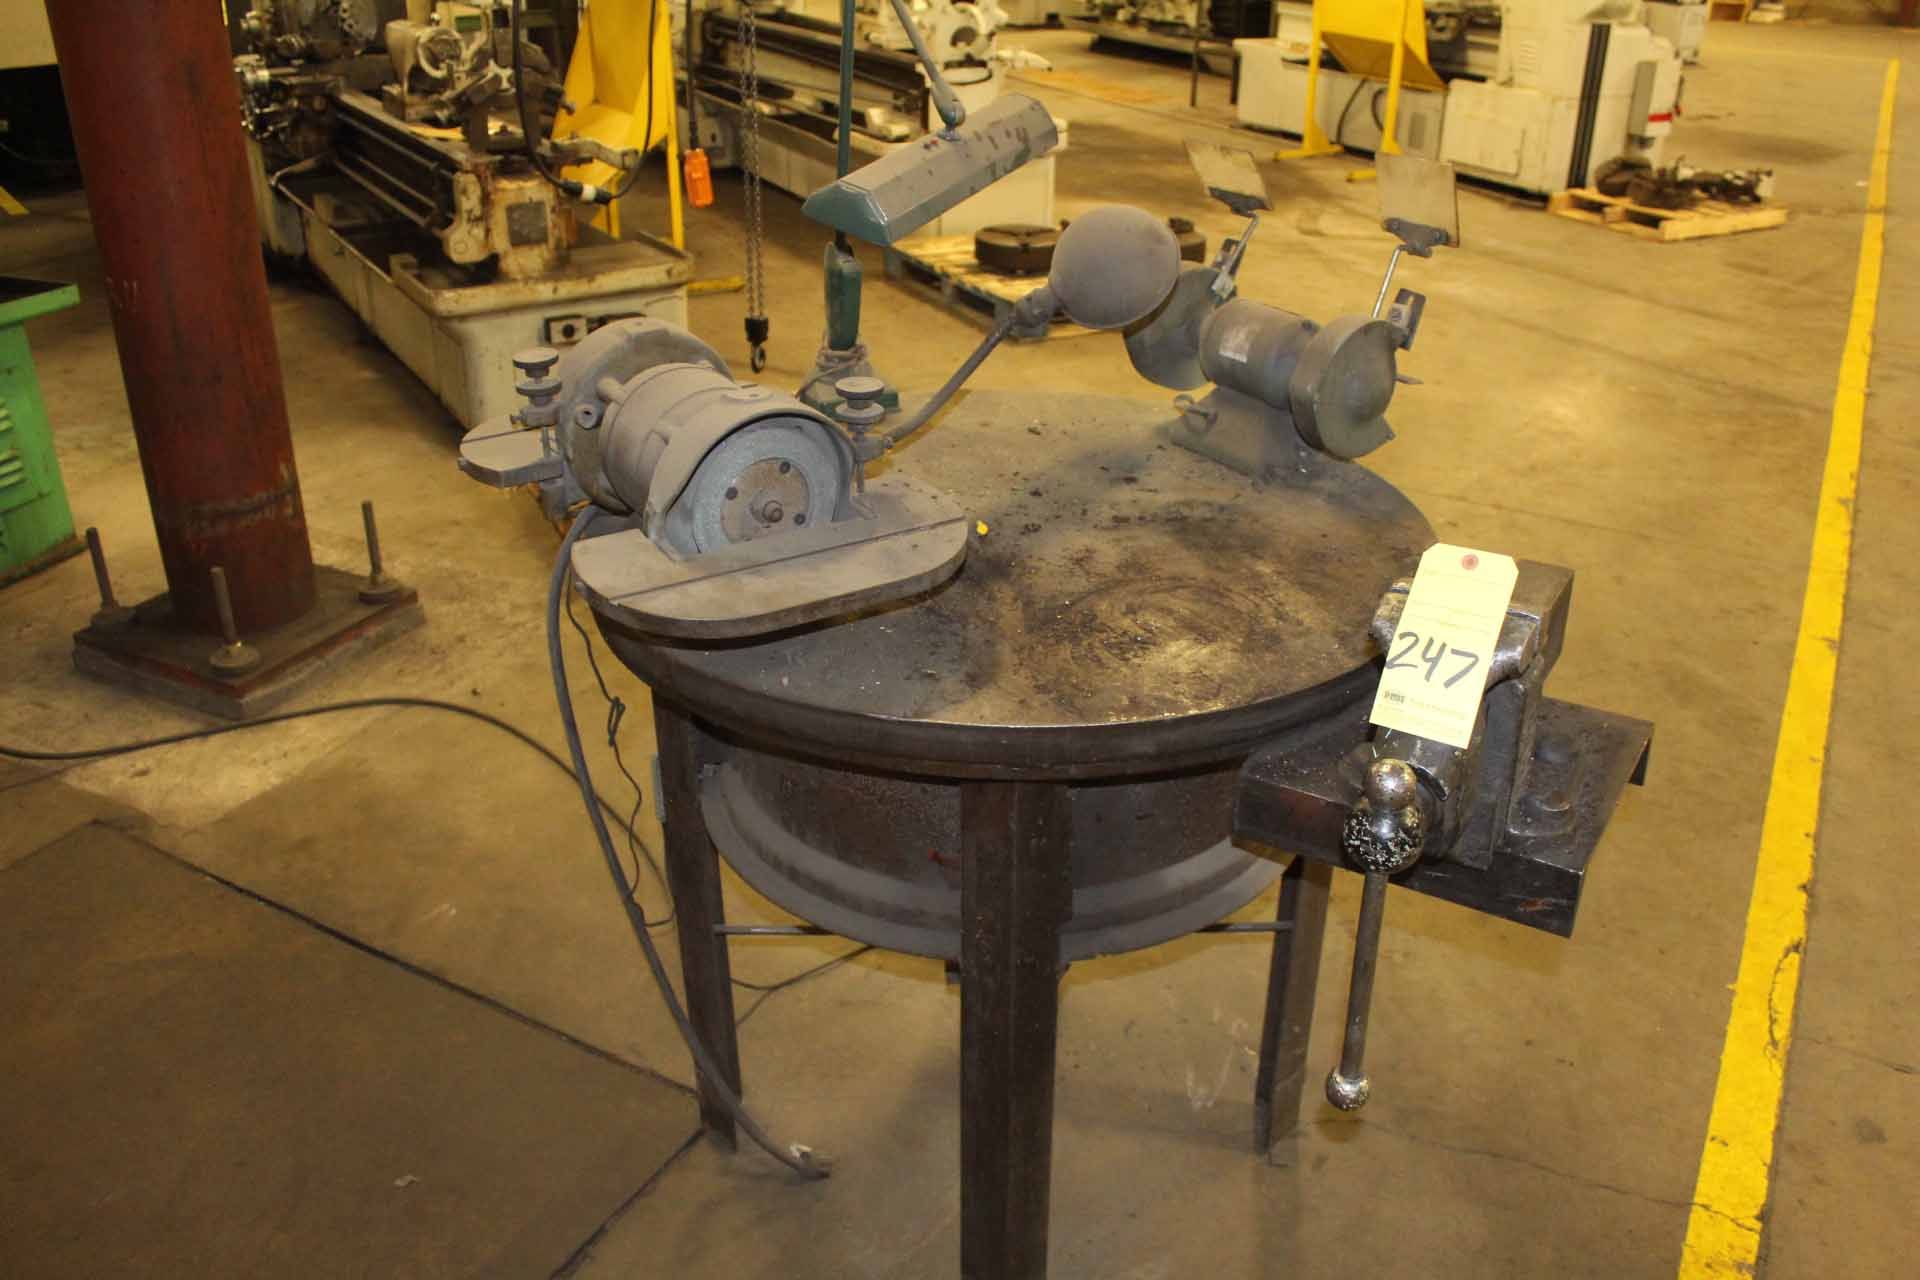 LOT CONSISTING OF: 39-1/2" dia. steel table w/6" dbl. end face type tool grinder, 6" dbl. end